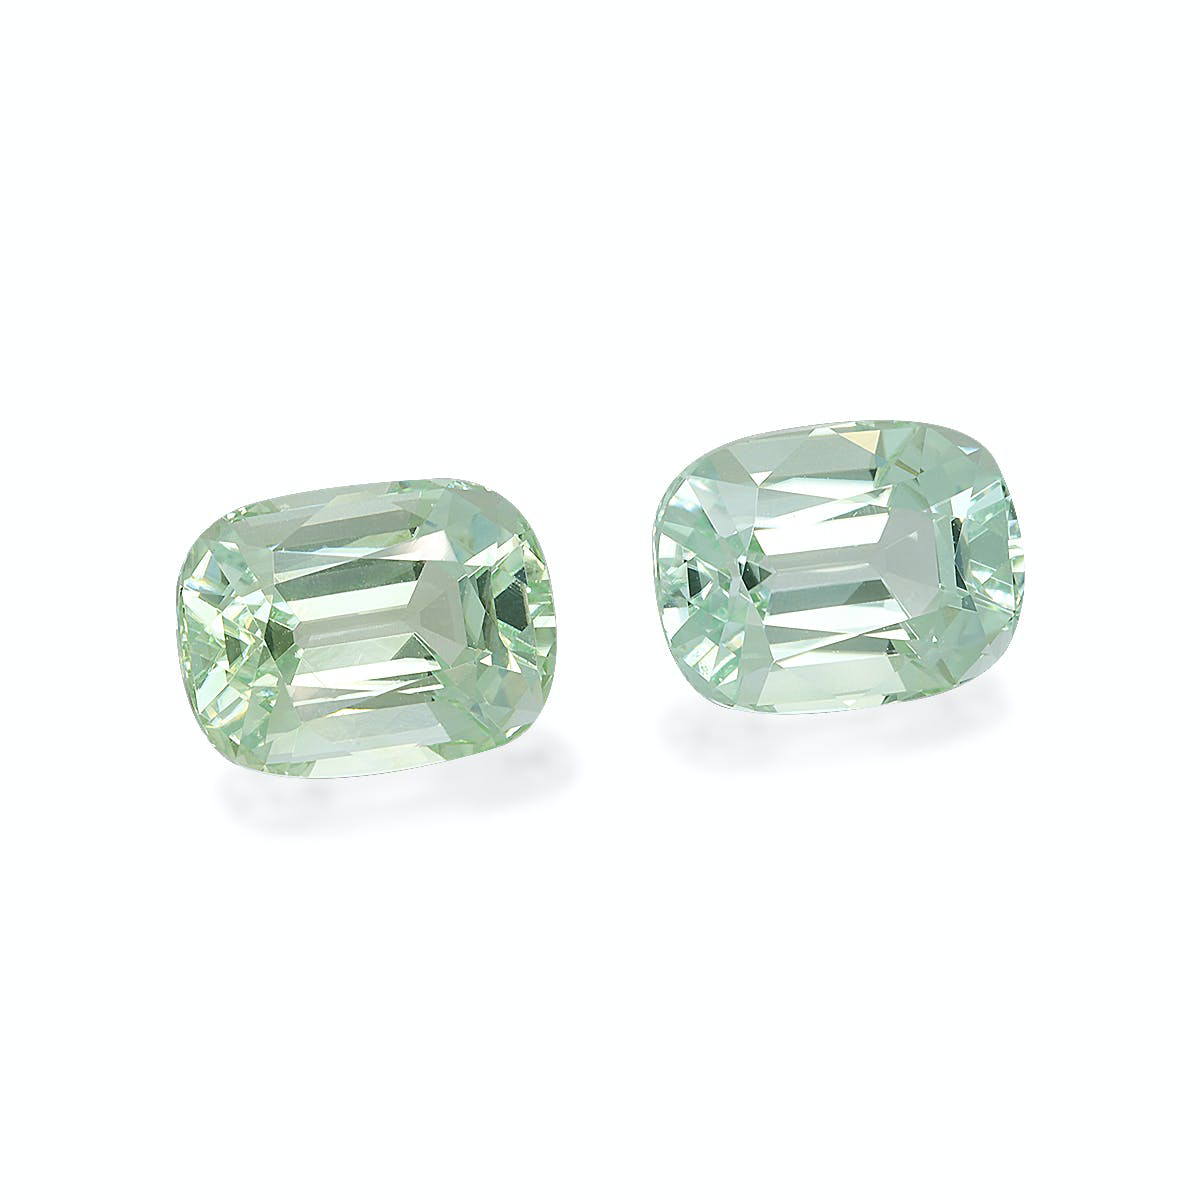 Picture of Mist Green Tourmaline 10.58ct - 11x9mm Pair (TG1580)